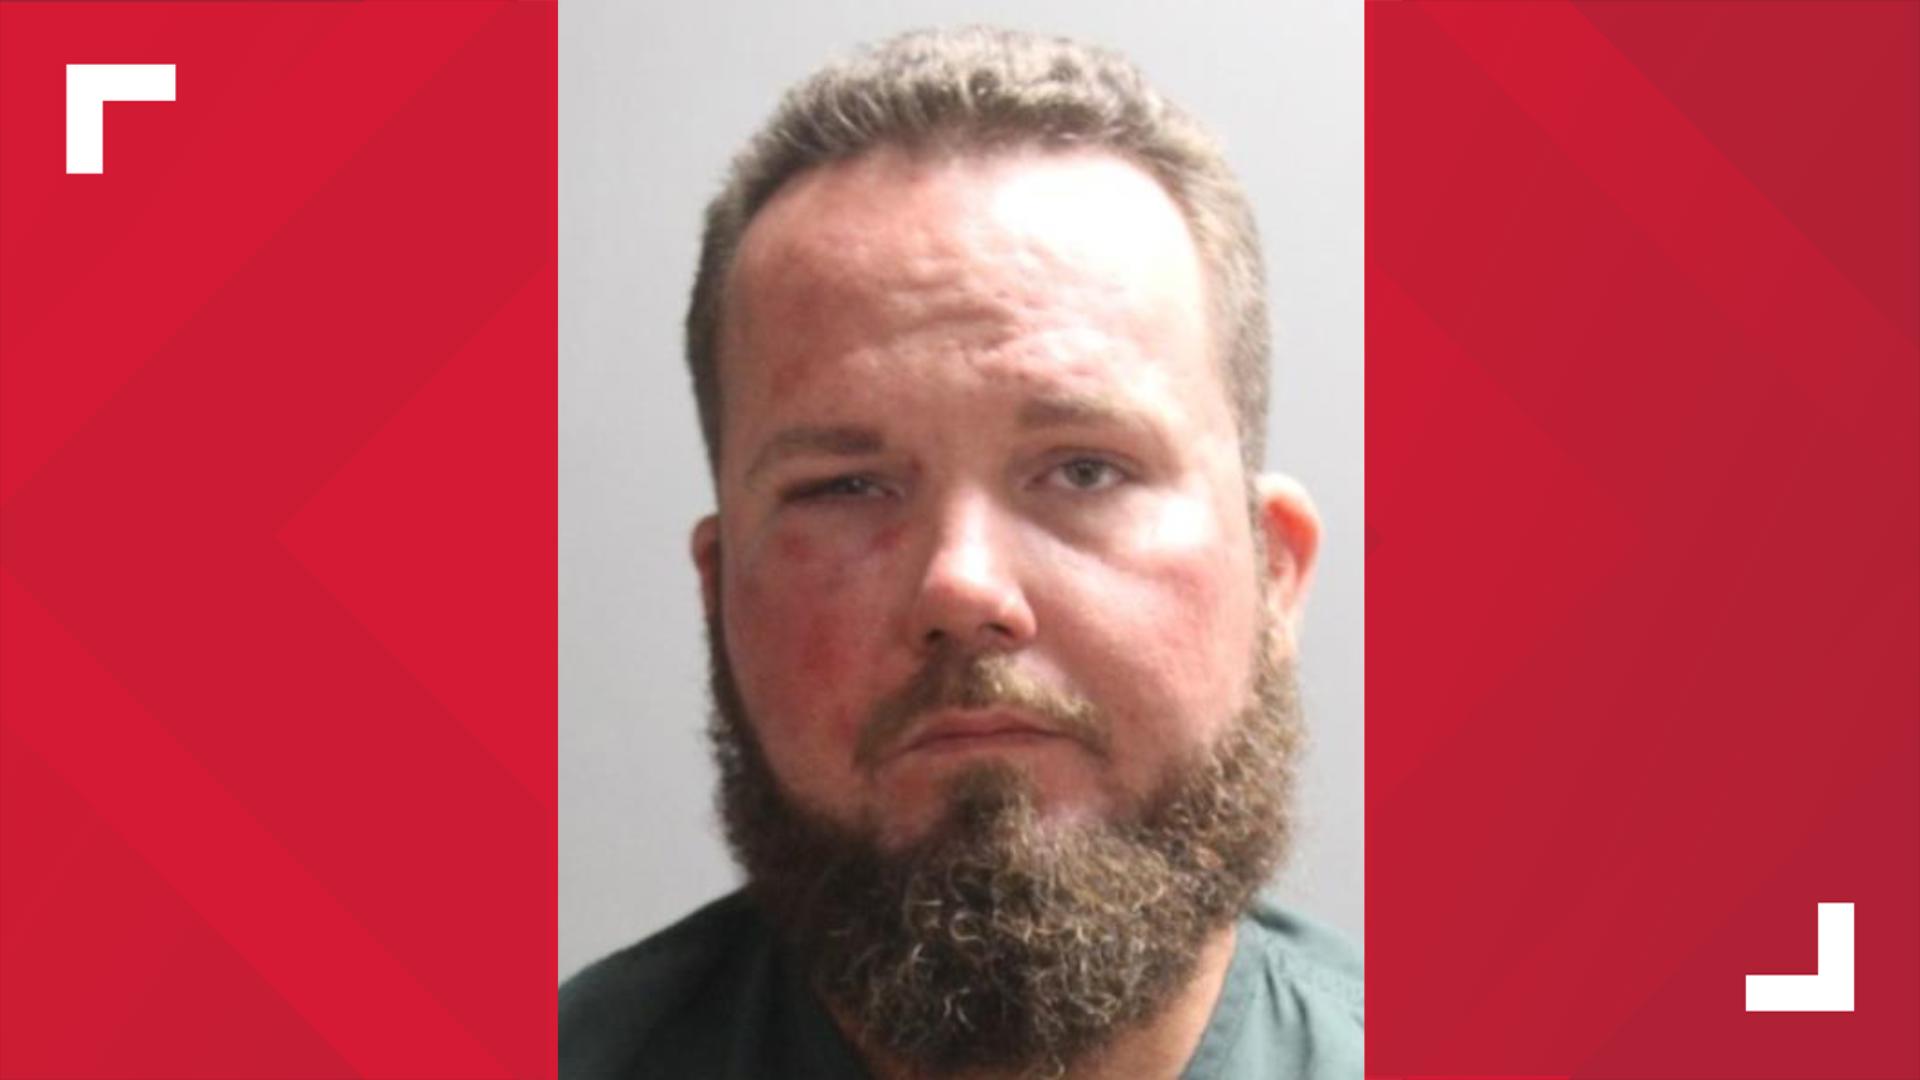 Austin Maddox, 33, was among 27 men arrested during "Operation Valiant Knights," which targeted suspects using the internet to sexually exploit children.